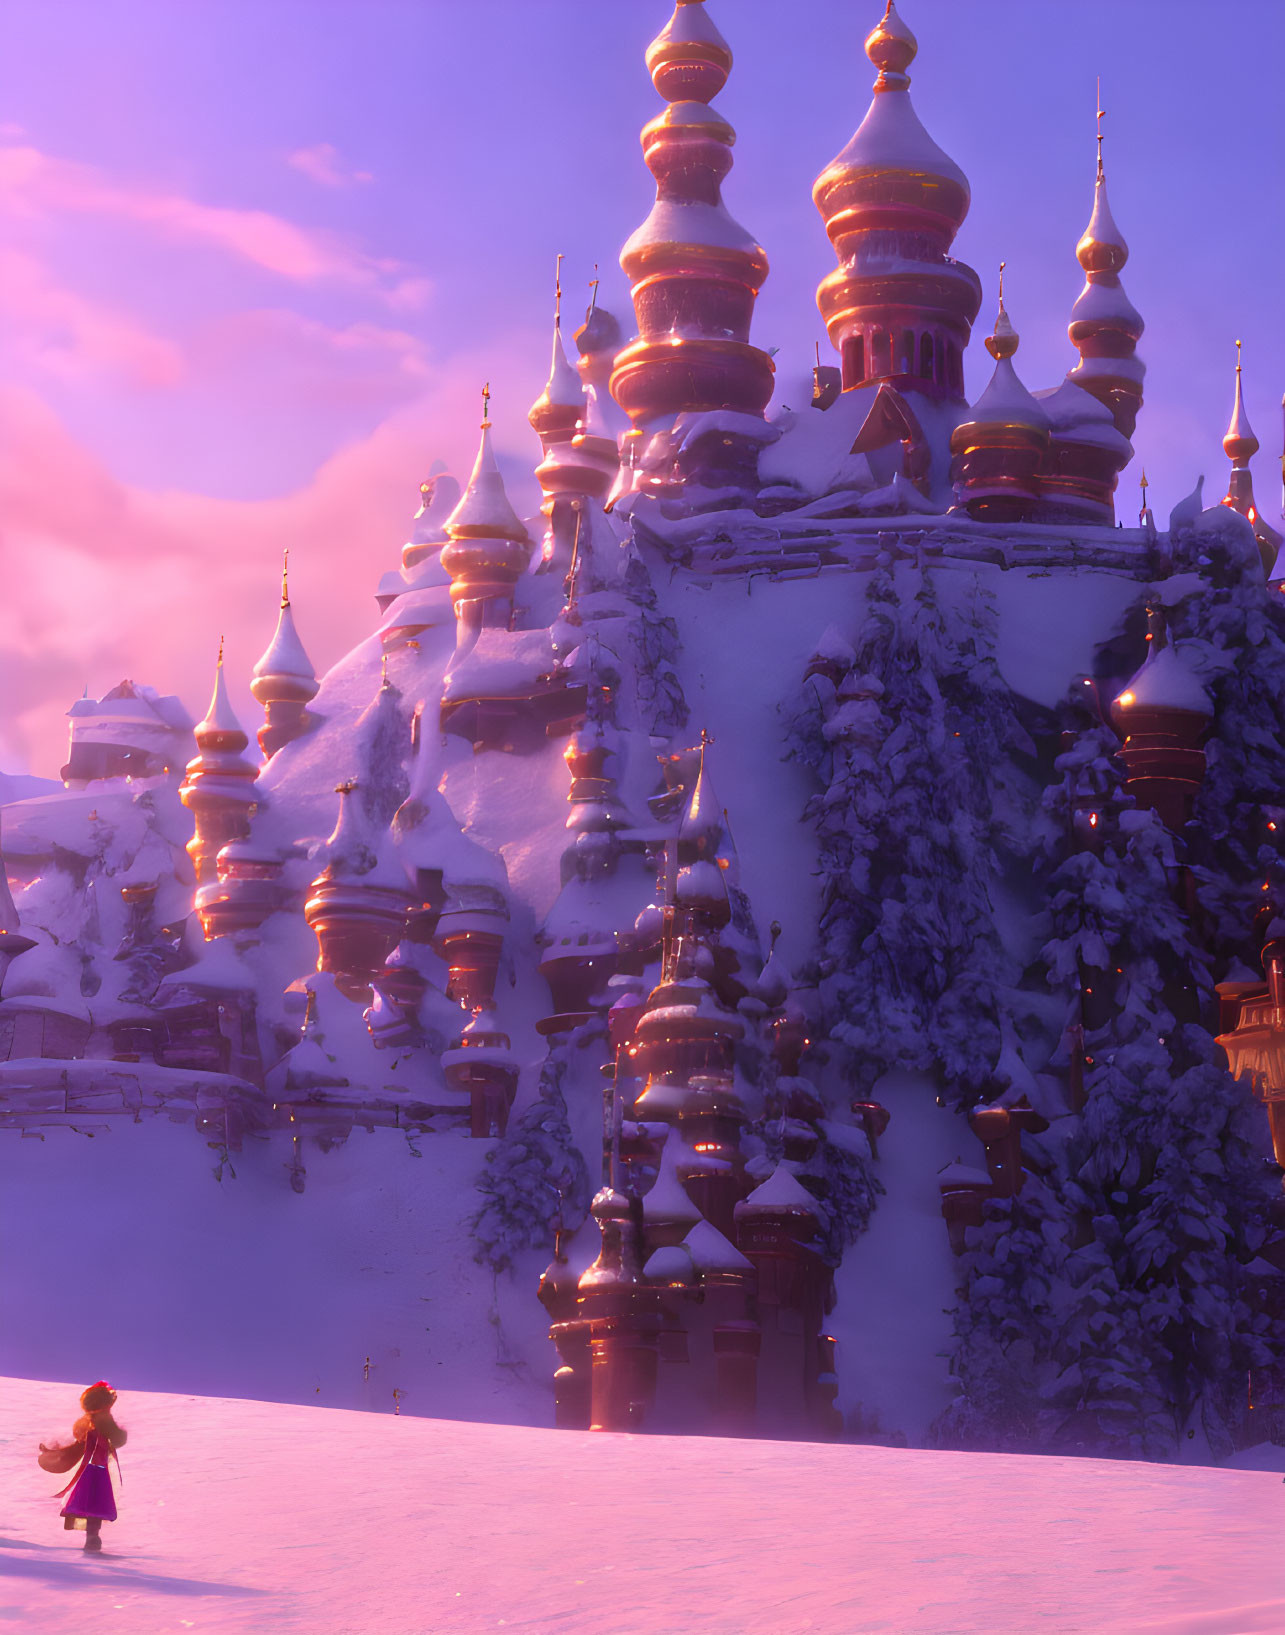 Snow-covered palace with onion domes in pink light at dusk